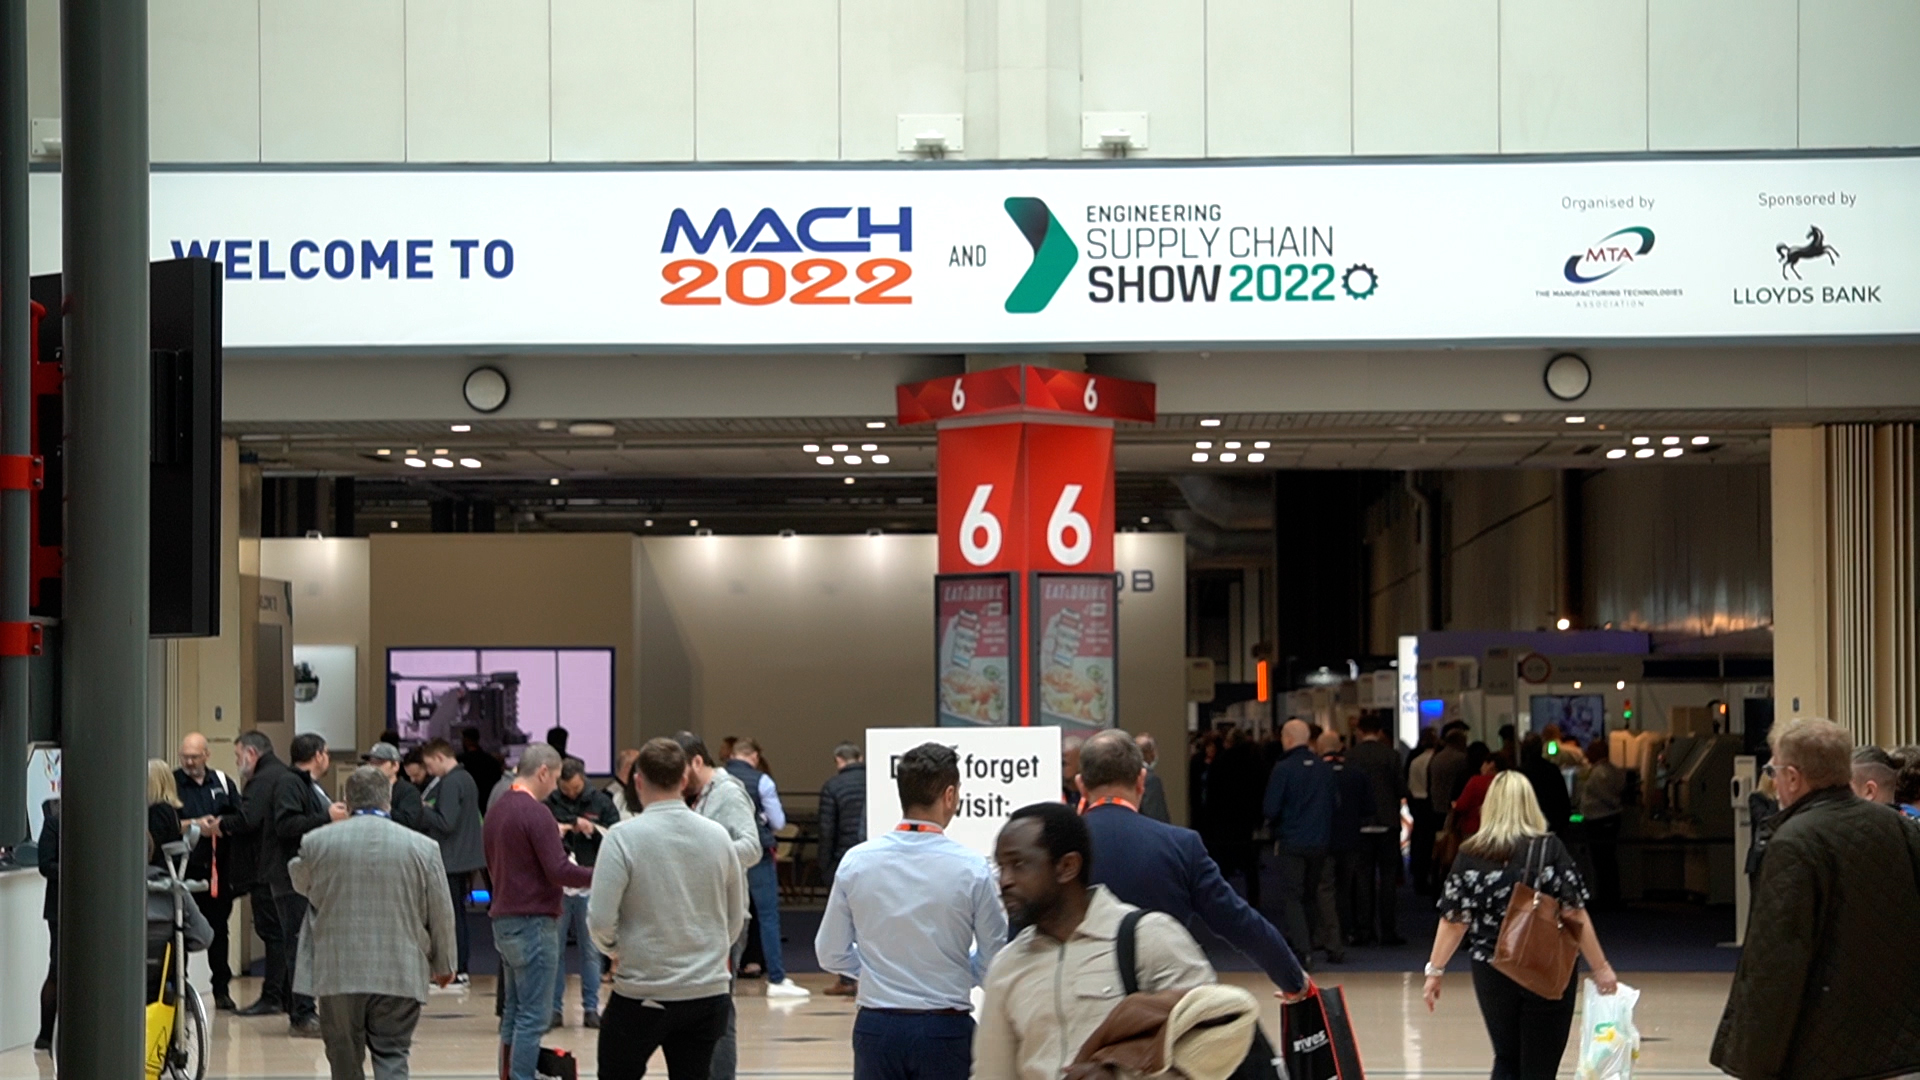 Juergen Maier discusses digital know-how and decarbonisation at MACH 2022